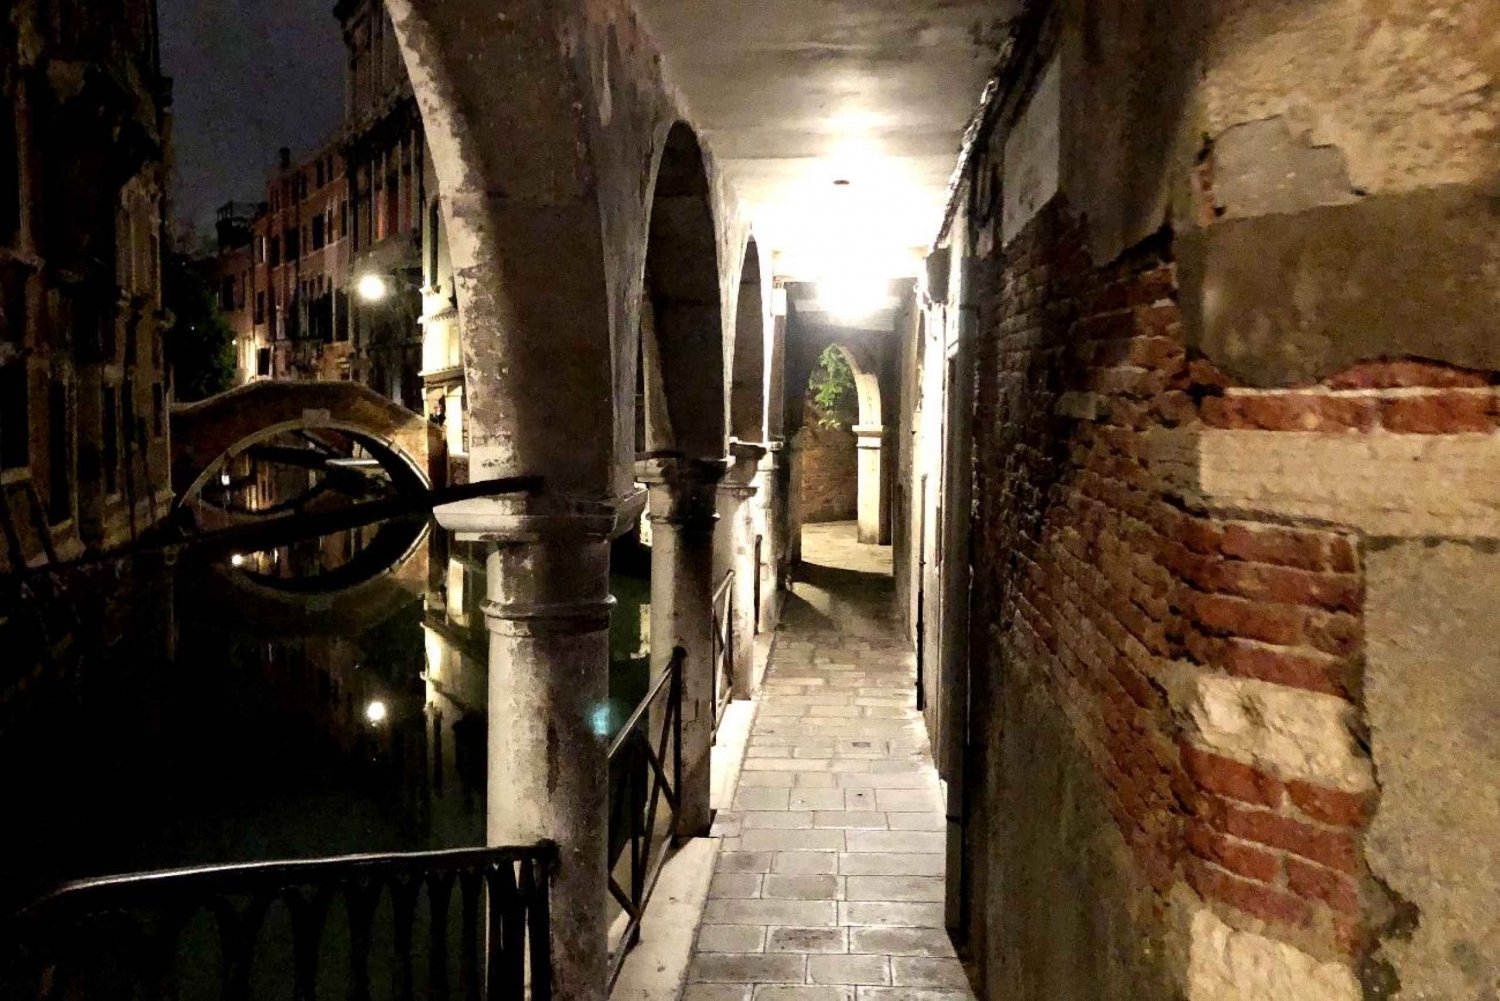 Venice Walking Tour by Night: Aperitif and Legends